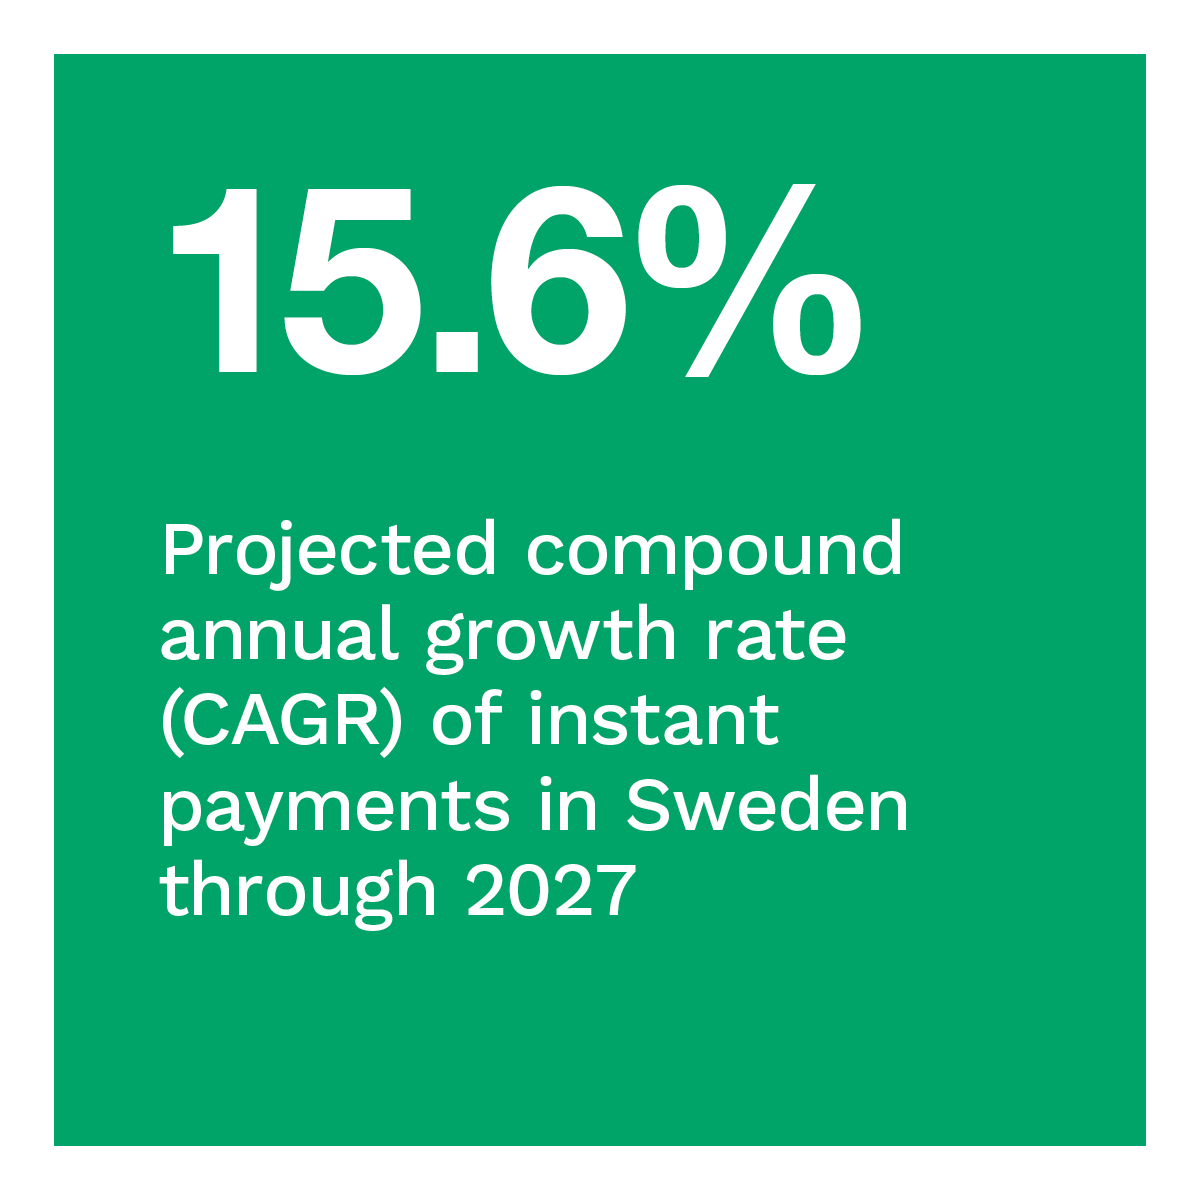  Projected compound annual growth rate (CAGR) of instant payments in Sweden through 2027